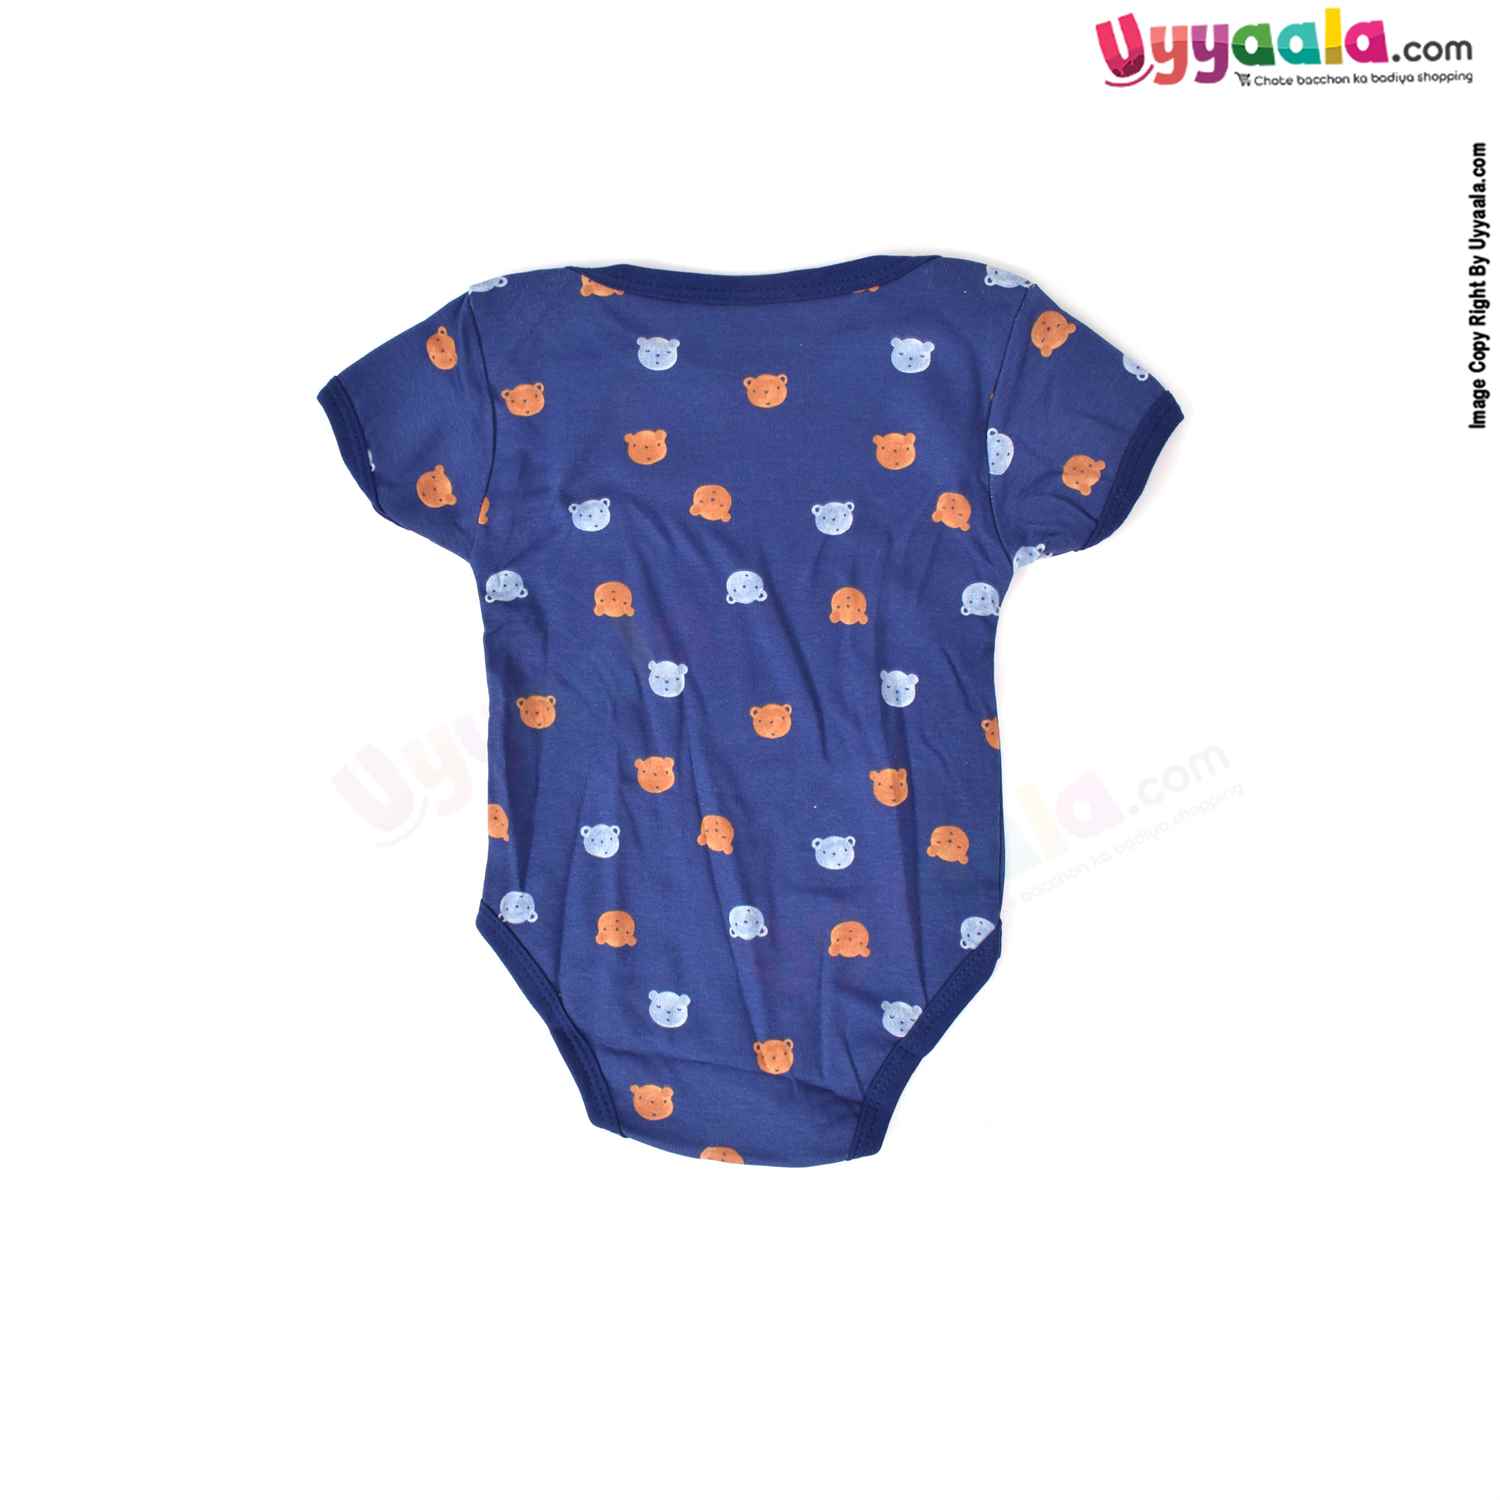 Precious One Short Sleeve Body Suit 100% Soft Hosiery Cotton - Navy Blue with Bears Print (9-12M)